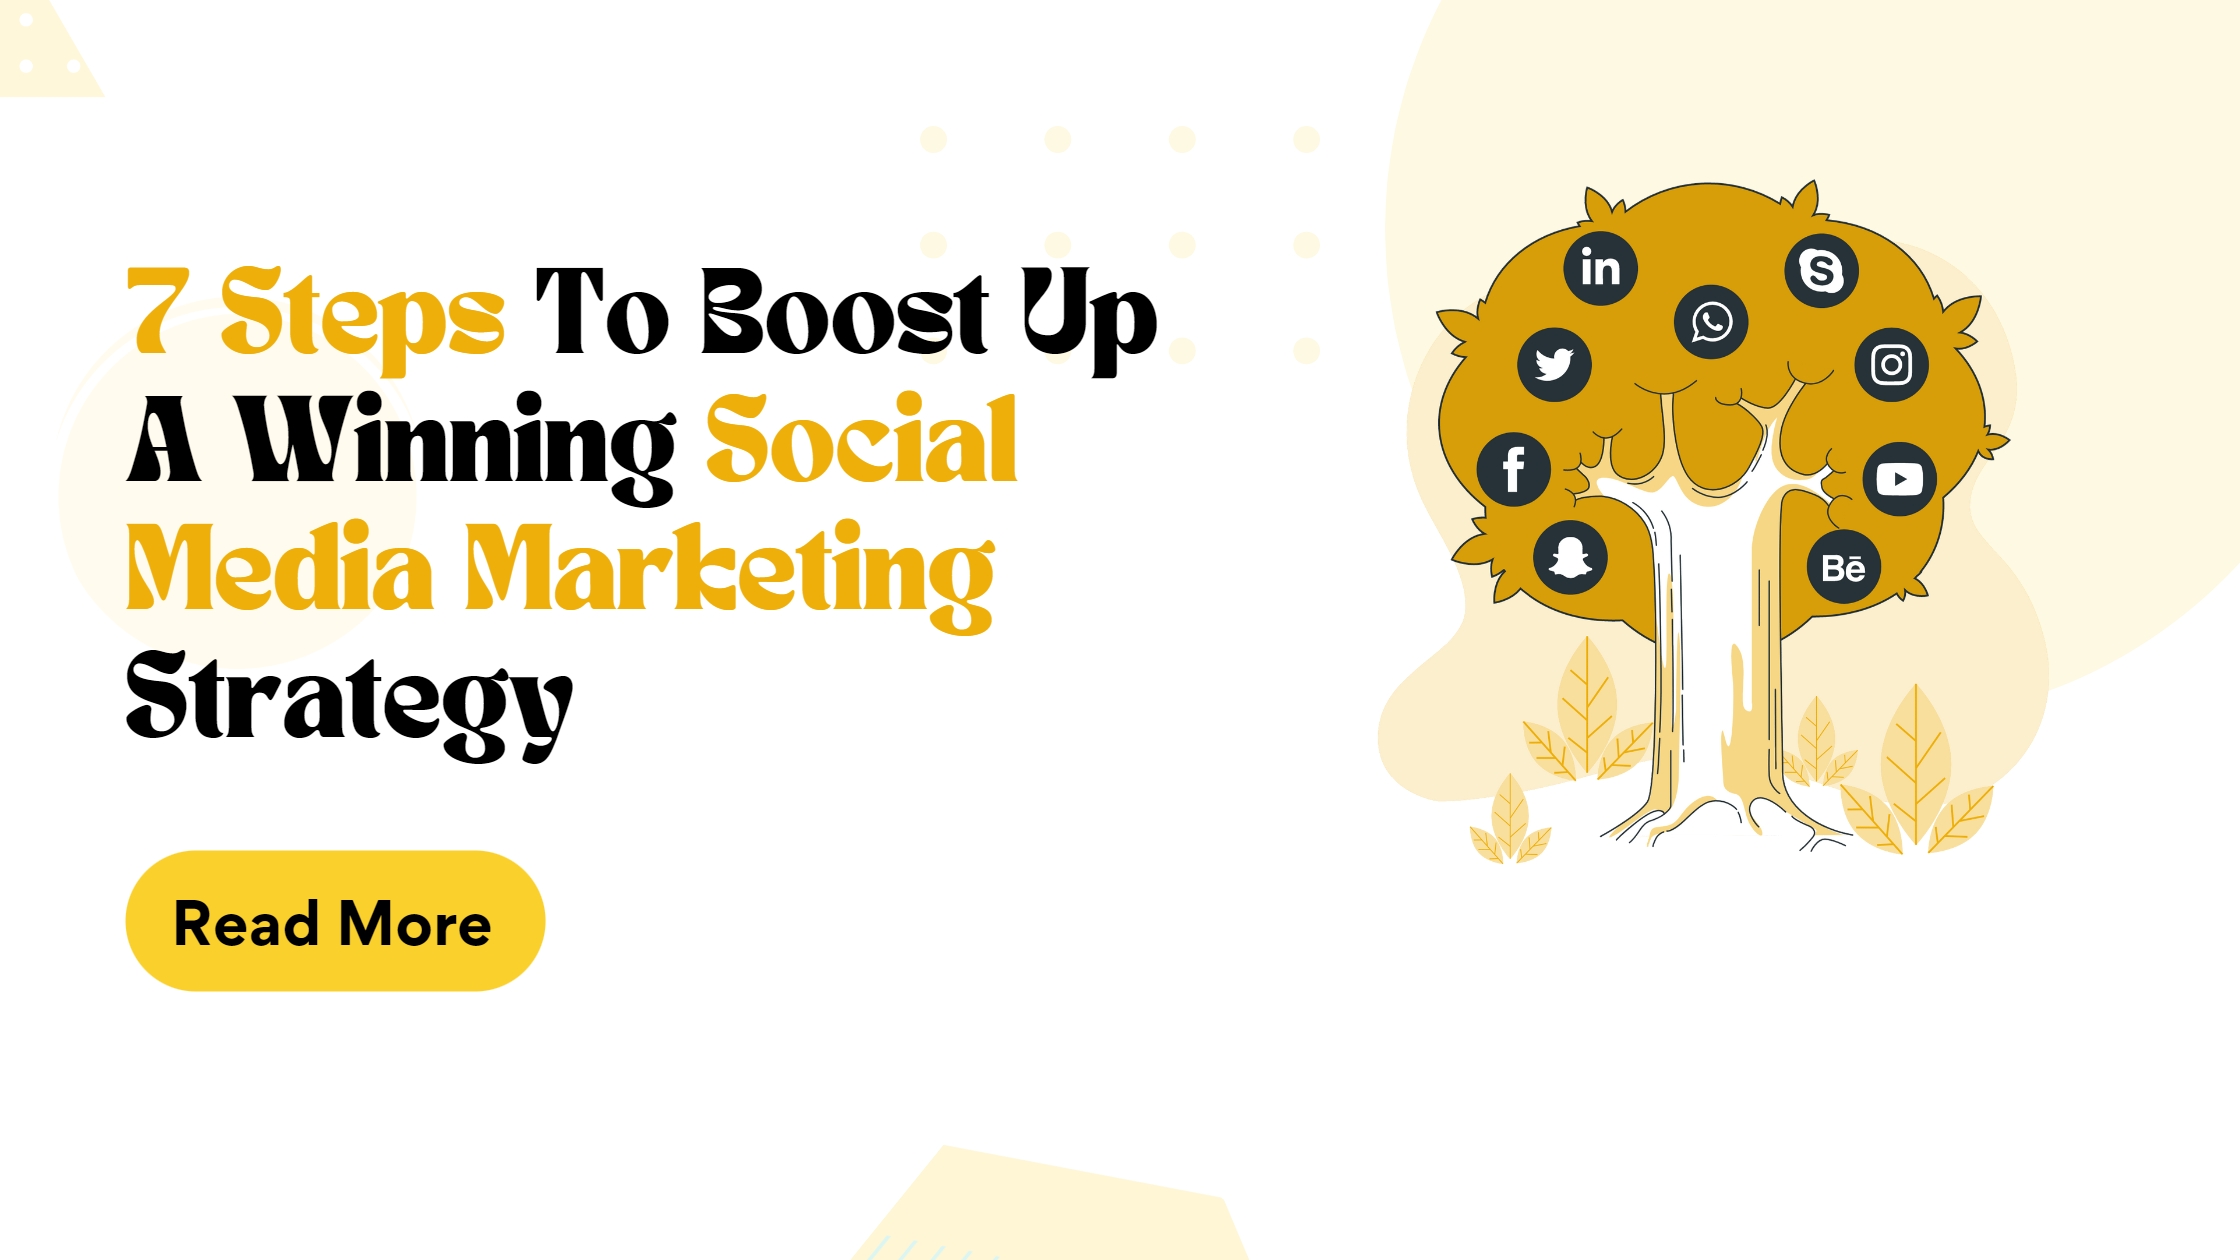 7 Steps to boost up a Winning Social Media Marketing Strategy